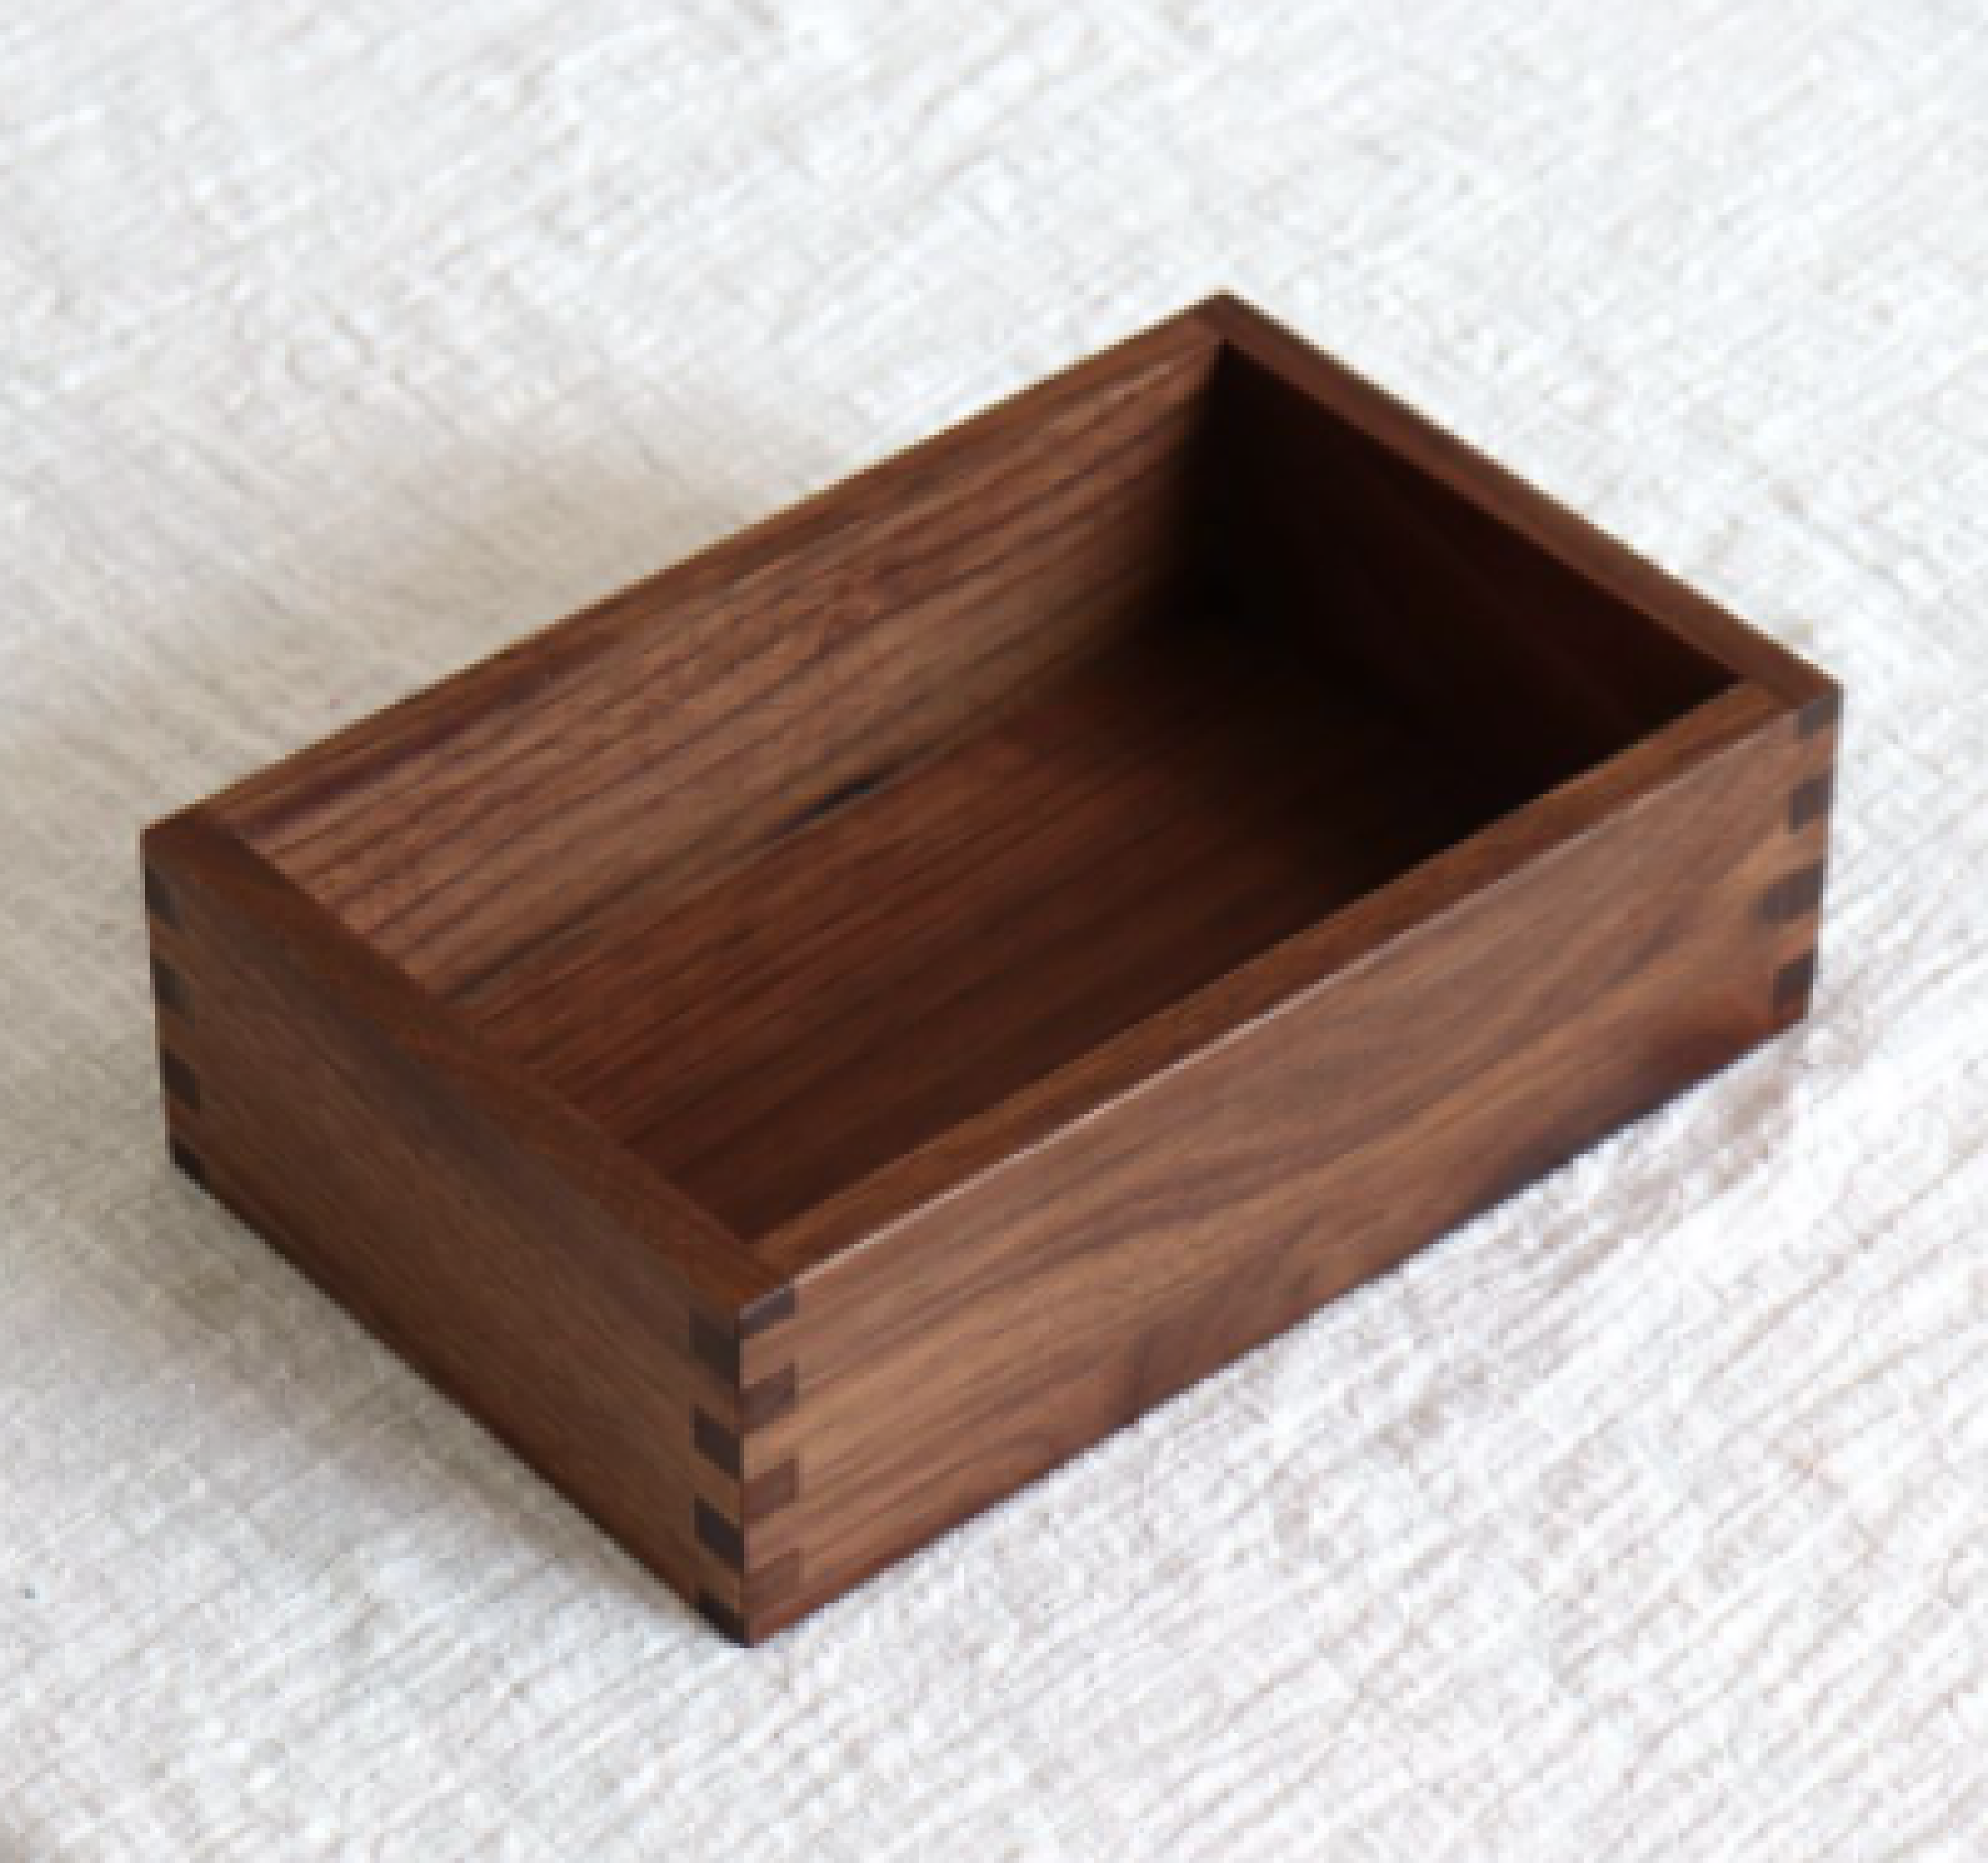 Wooden storage box without cover